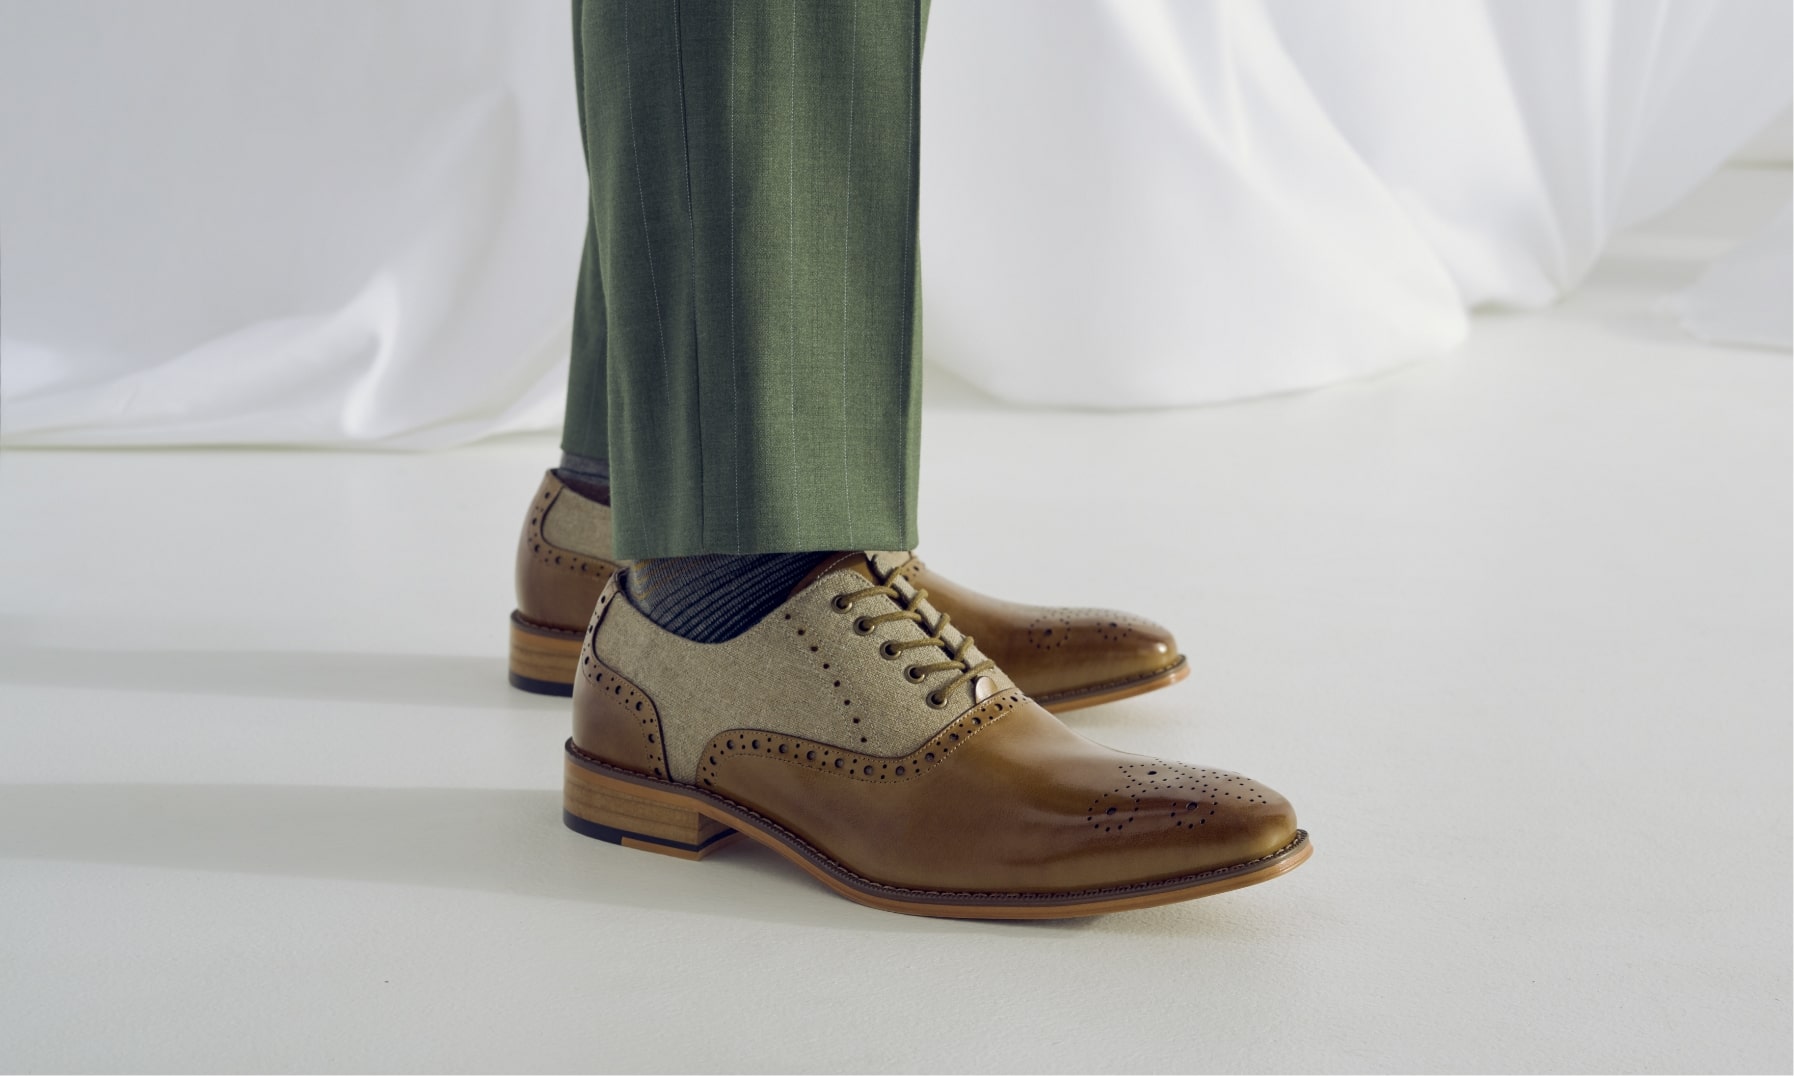 Click to shop Stacy Adams dress shoes. Image features the Harrington in cognac multi.